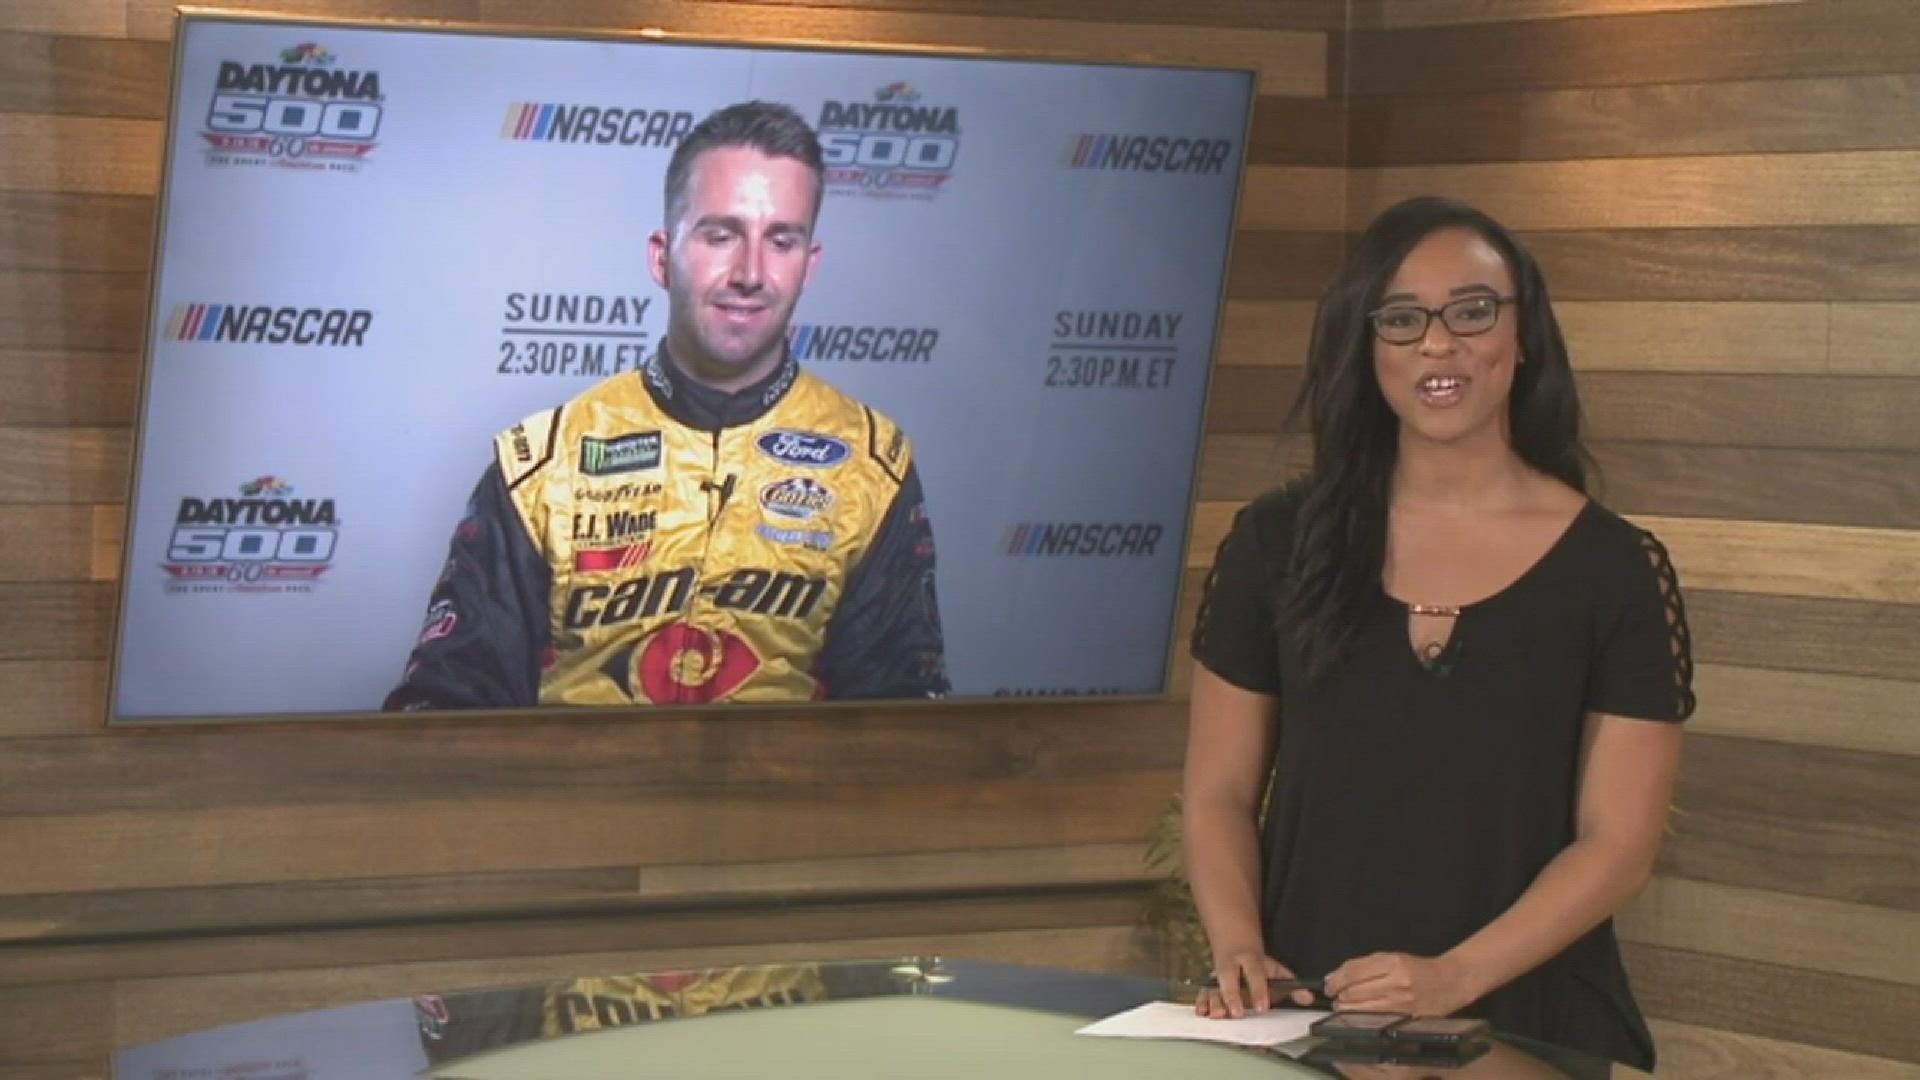 Matt DiBenedetto, driver of the No. 32 NASCAR Cup car, talks with ABC10's Lina Washington about his Nevada City roots and experiencing this weekend's Daytona 500.